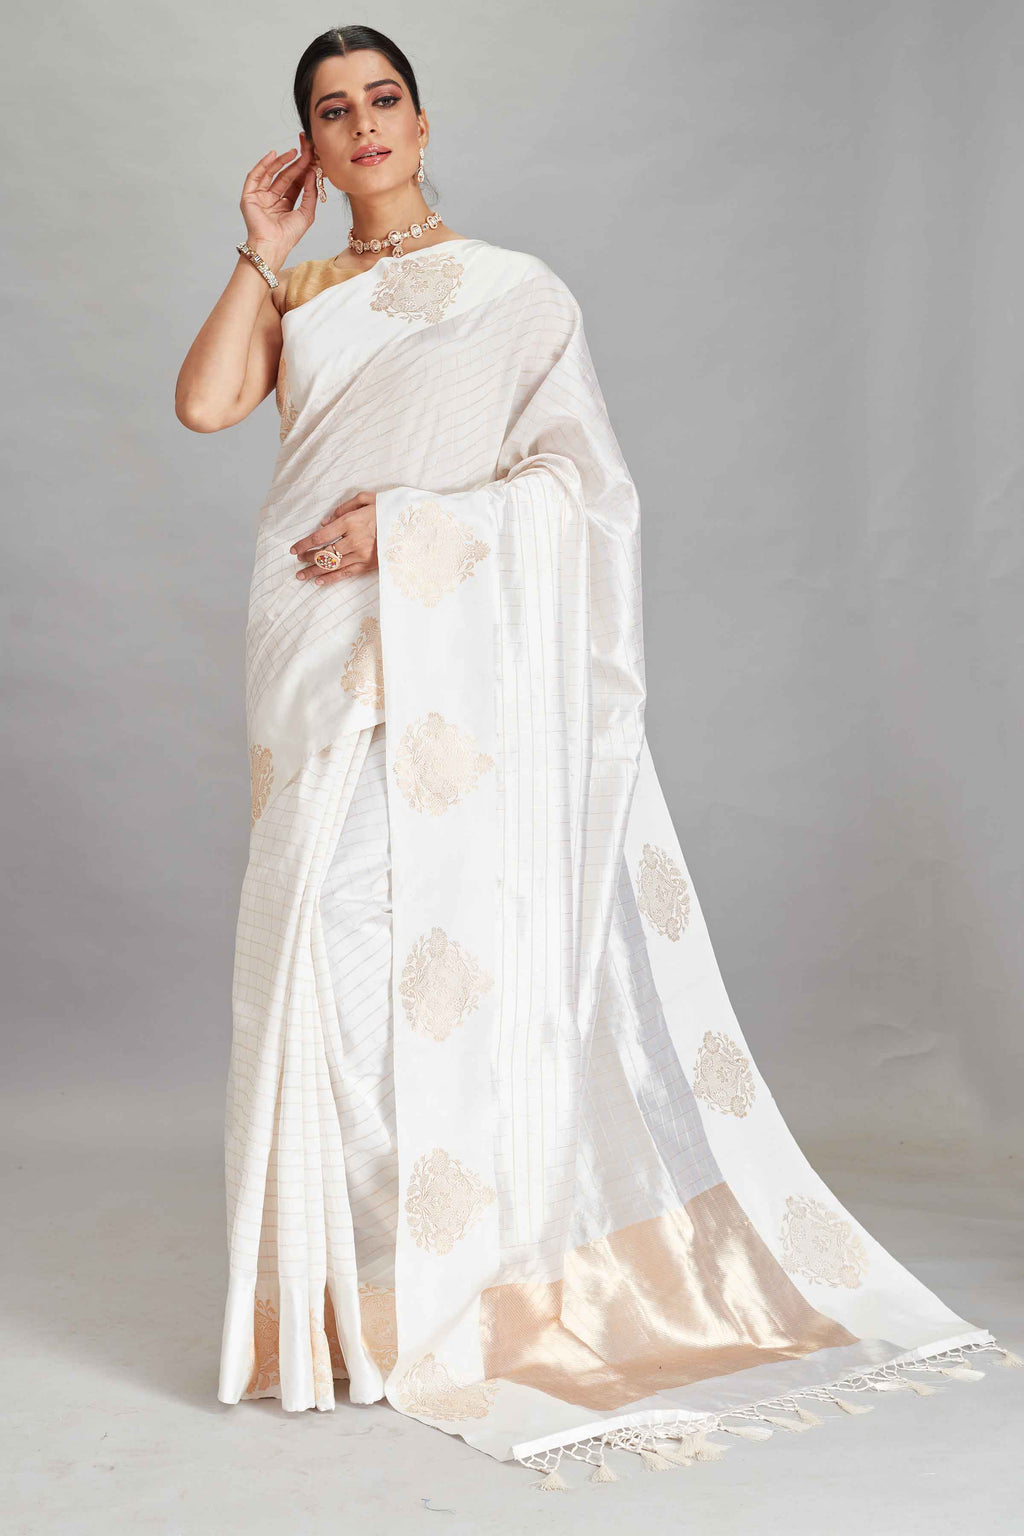 Buy white check silk Banarasi saree online in USA with zari motifs border. Look your best on festive occasions in latest designer sarees, pure silk sarees, Kanjivaram silk saris, handwoven saris, tussar silk sarees, embroidered saris from Pure Elegance Indian clothing store in USA.-full view